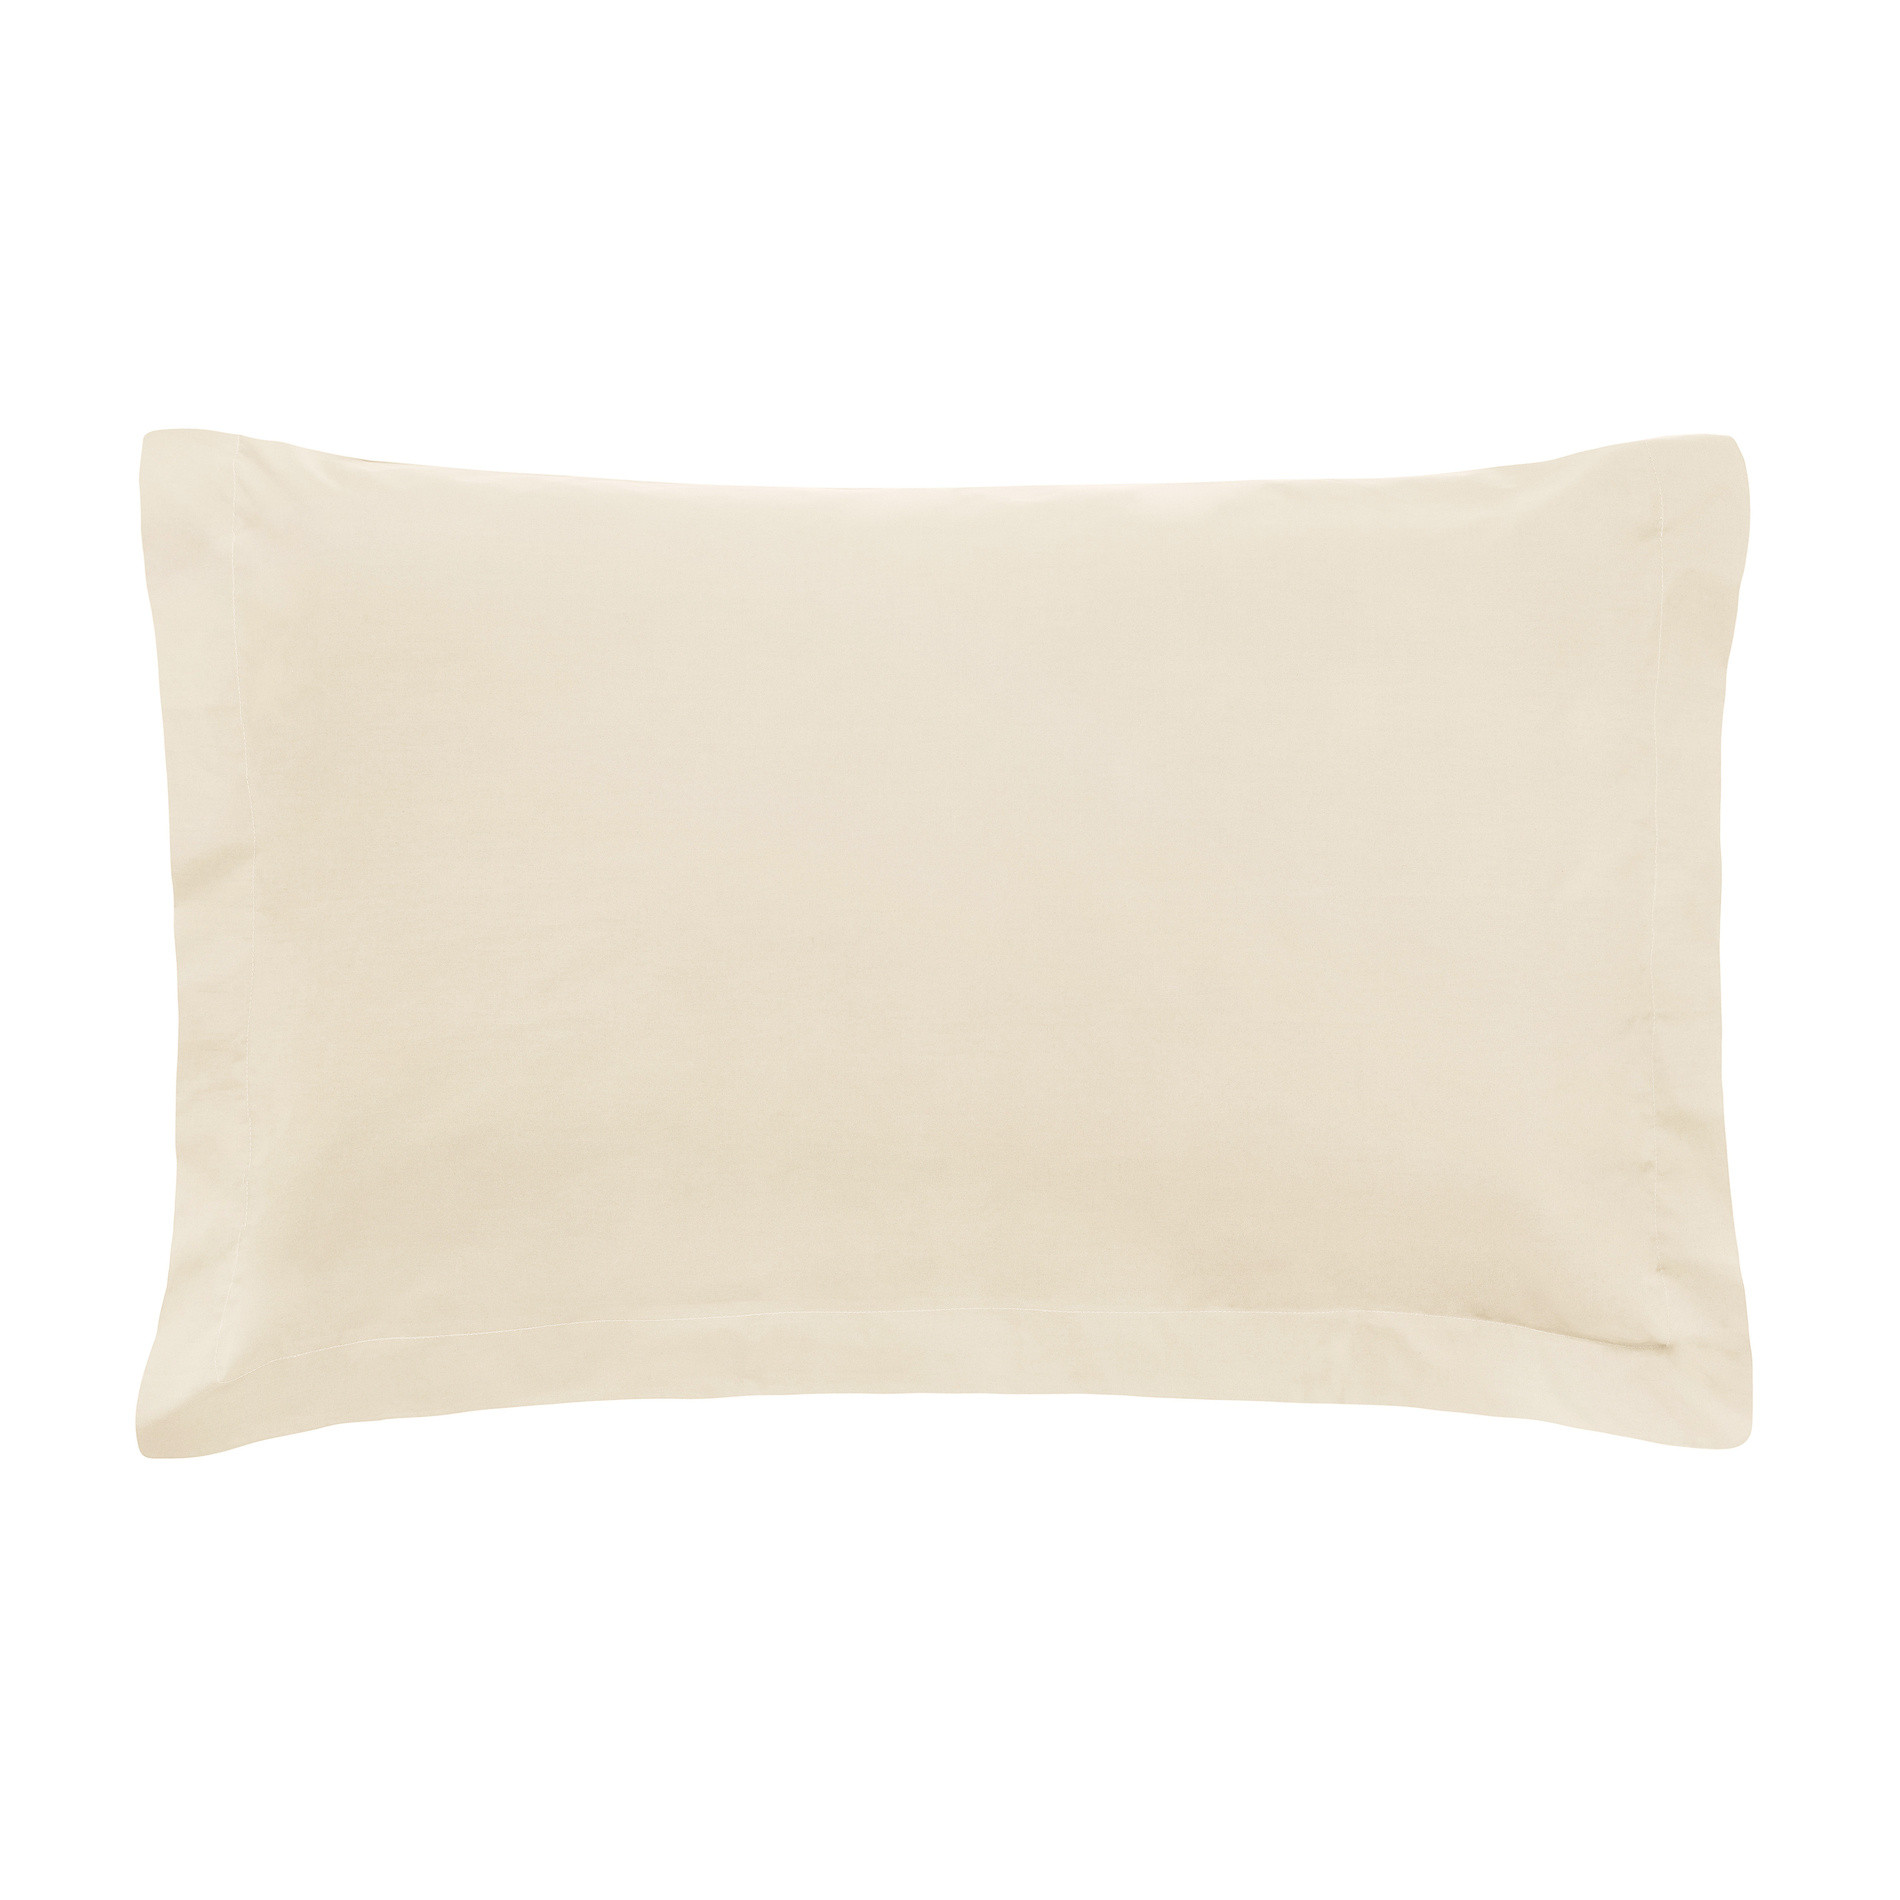 Zefiro solid colour pillowcase in percale., White Ivory, large image number 0